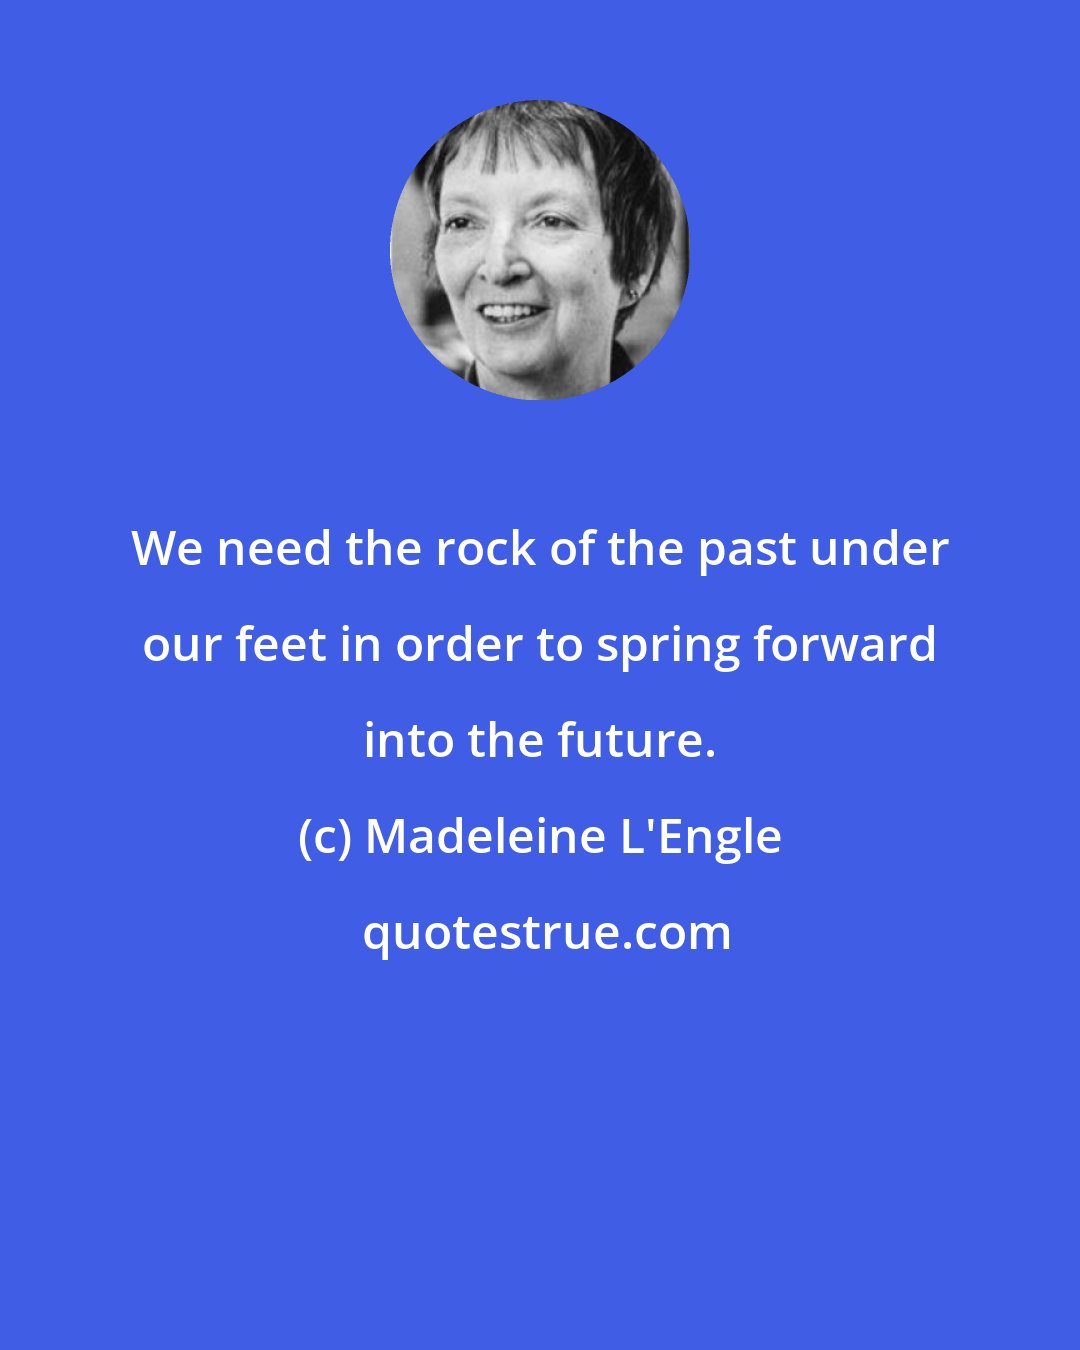 Madeleine L'Engle: We need the rock of the past under our feet in order to spring forward into the future.